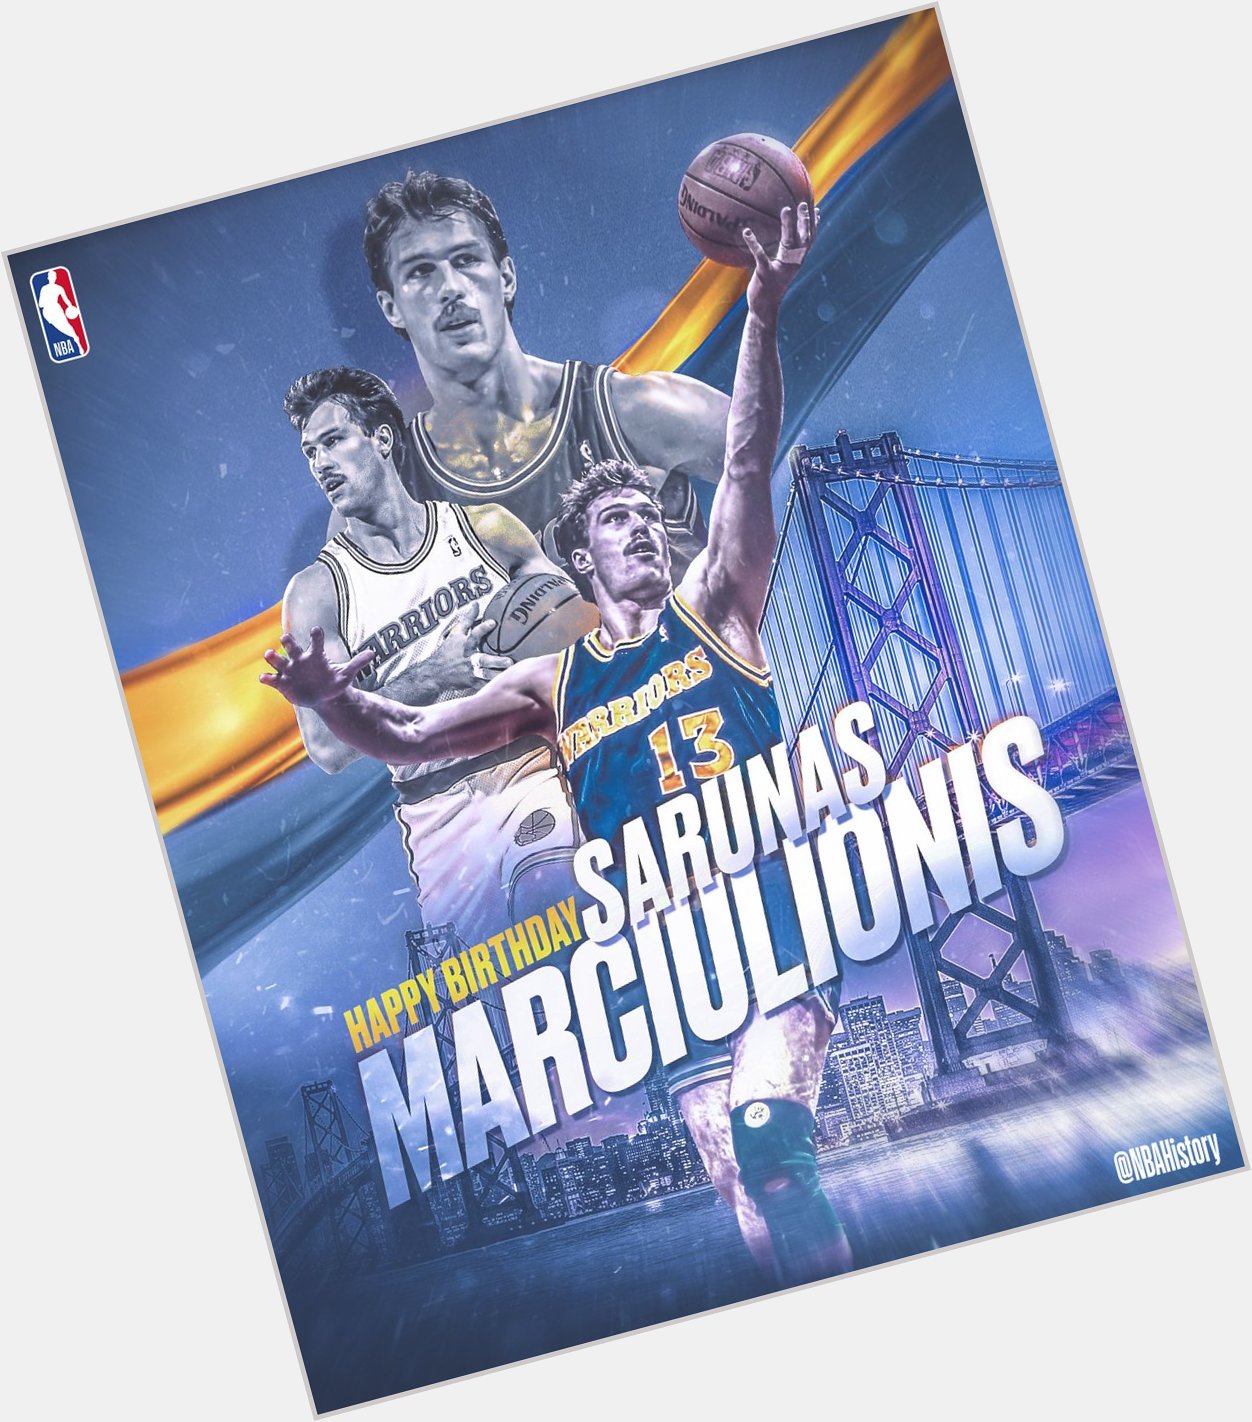 Happy 54th Birthday to Lithuanian legend and Hall of Famer, Sarunas Marciulionis! 